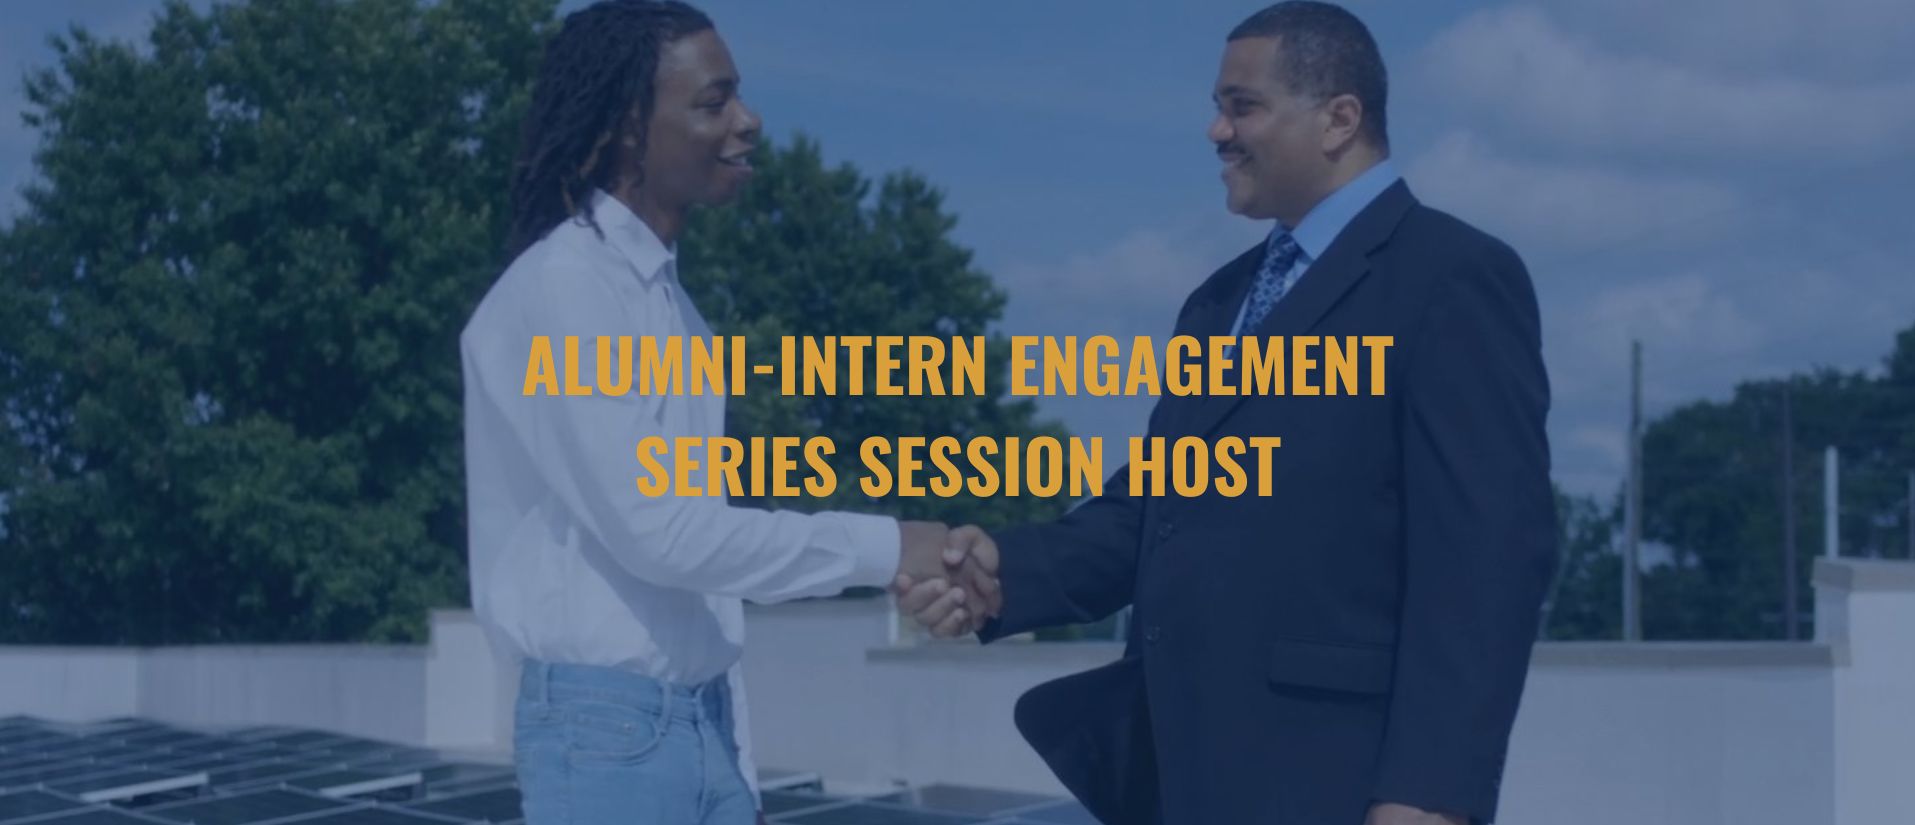 Featured image for “Volunteers Needed! Alumni-Intern Engagement Series Session Host”